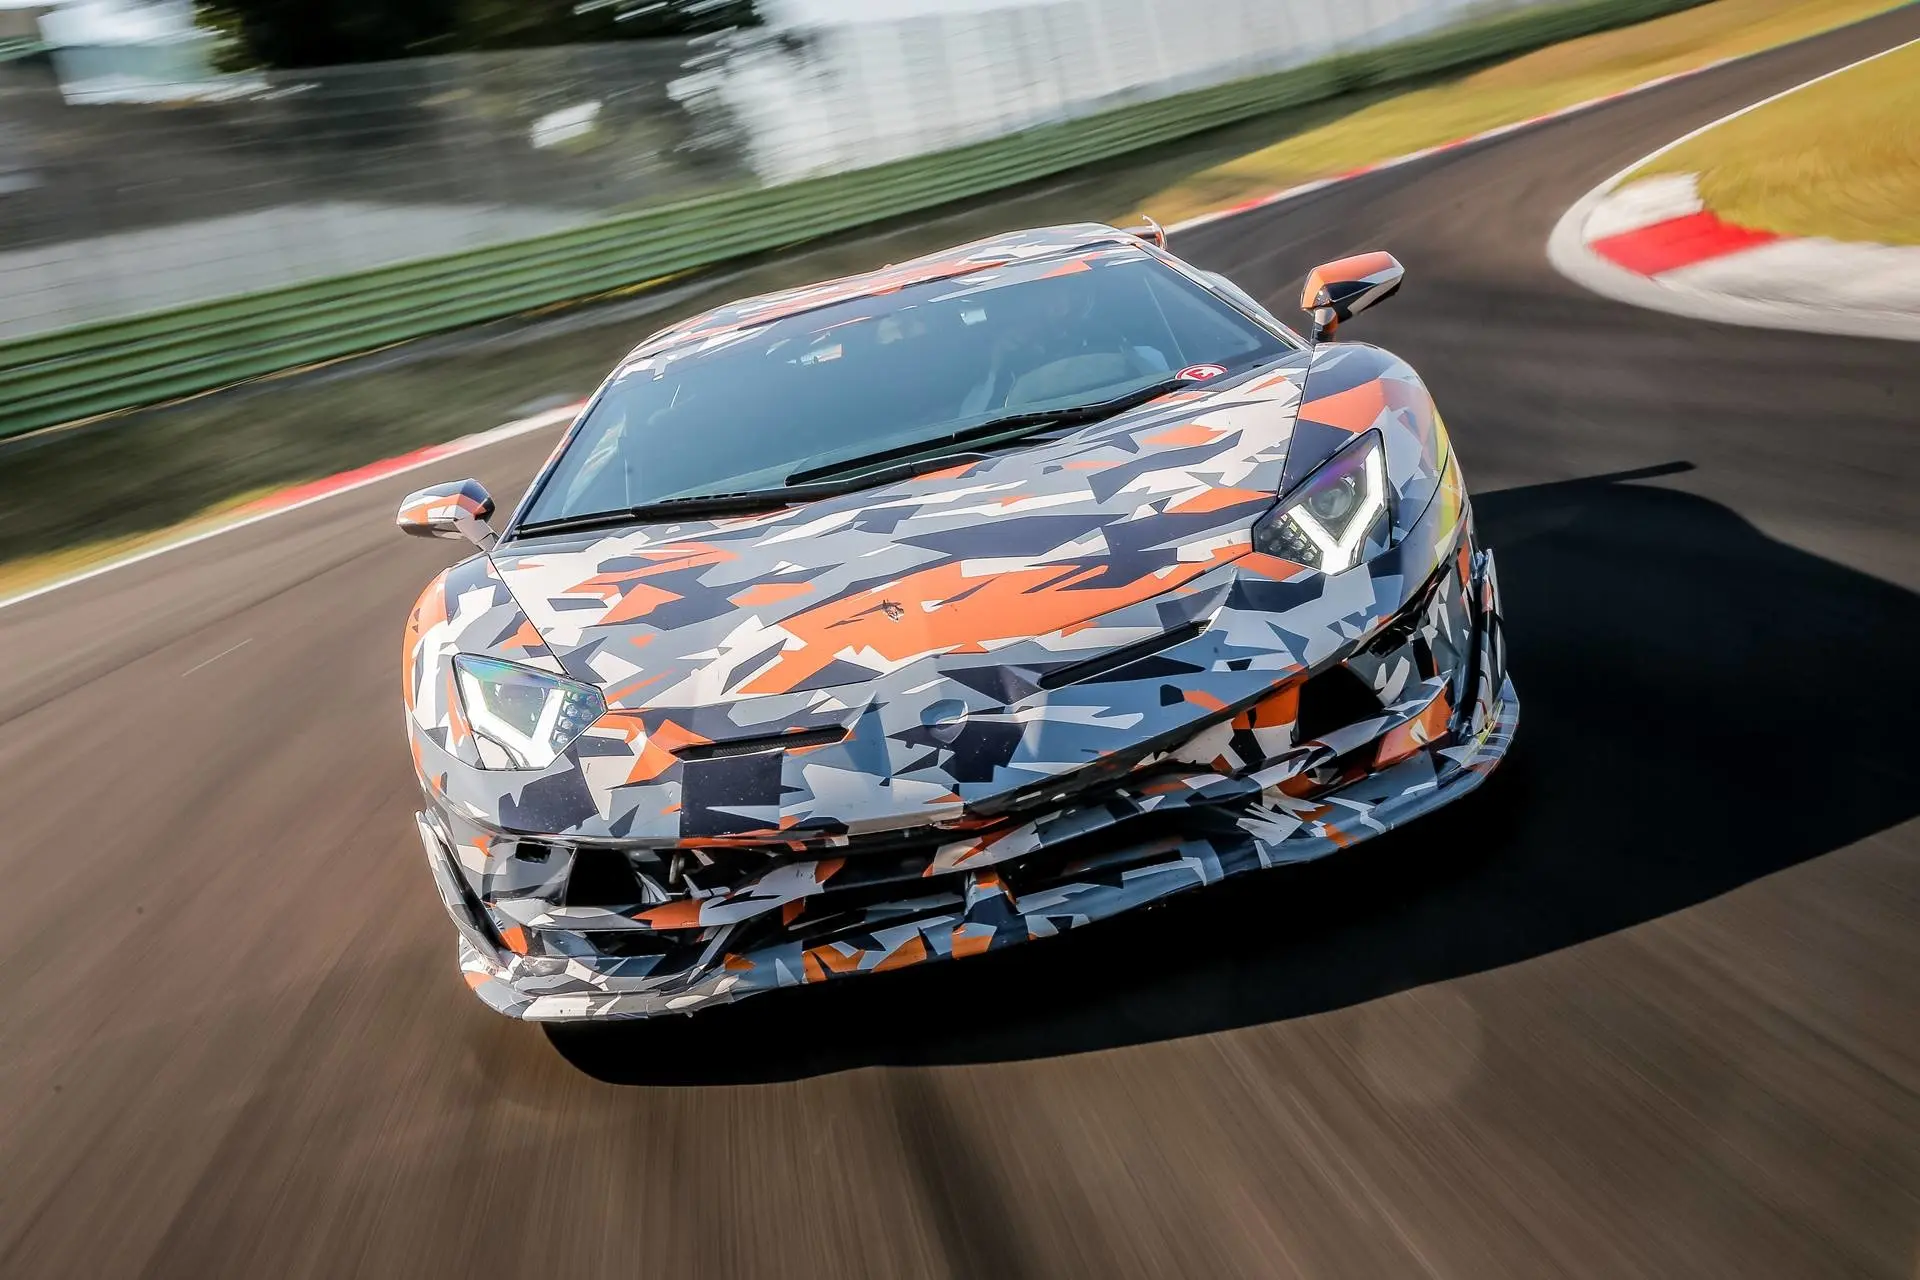 The Top 10 Fastest Production Cars in the World in 2019